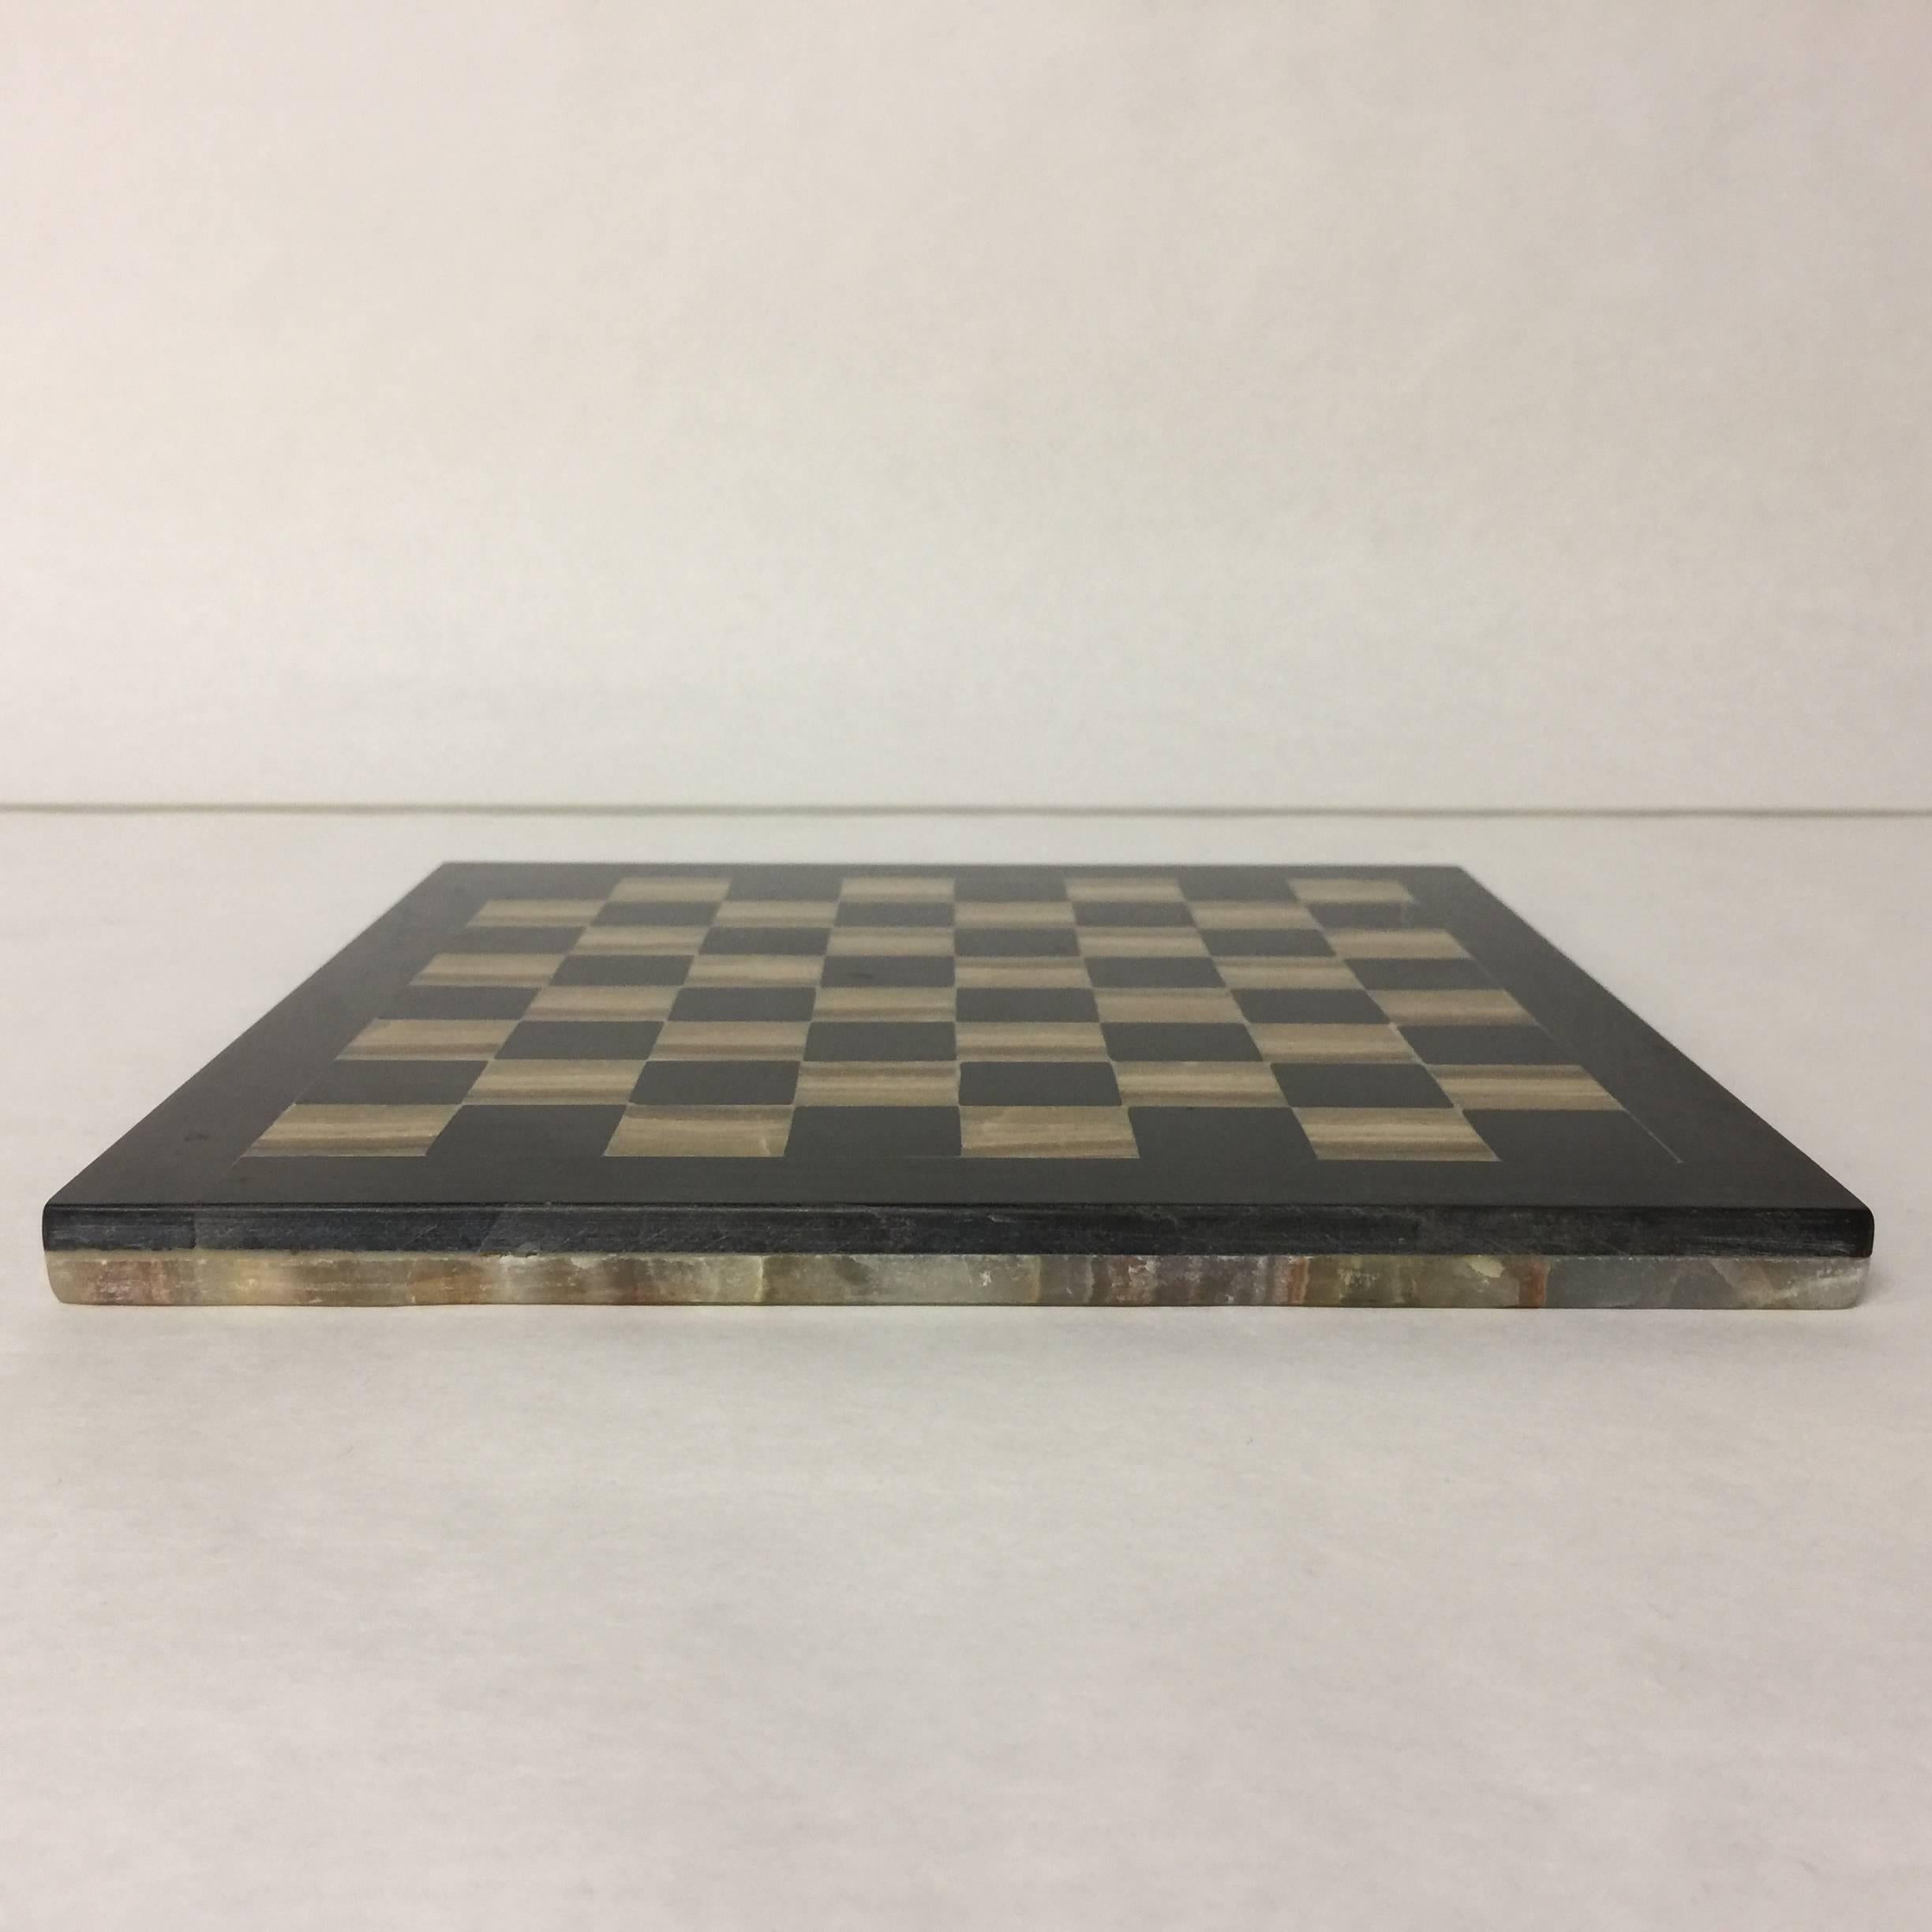 A perfect desk or coffee table accessory, this vintage agate chess or checkers board features two gorgeous sides. The game board side is done in shades of black and gold, while the other side is a patchwork design of agate.